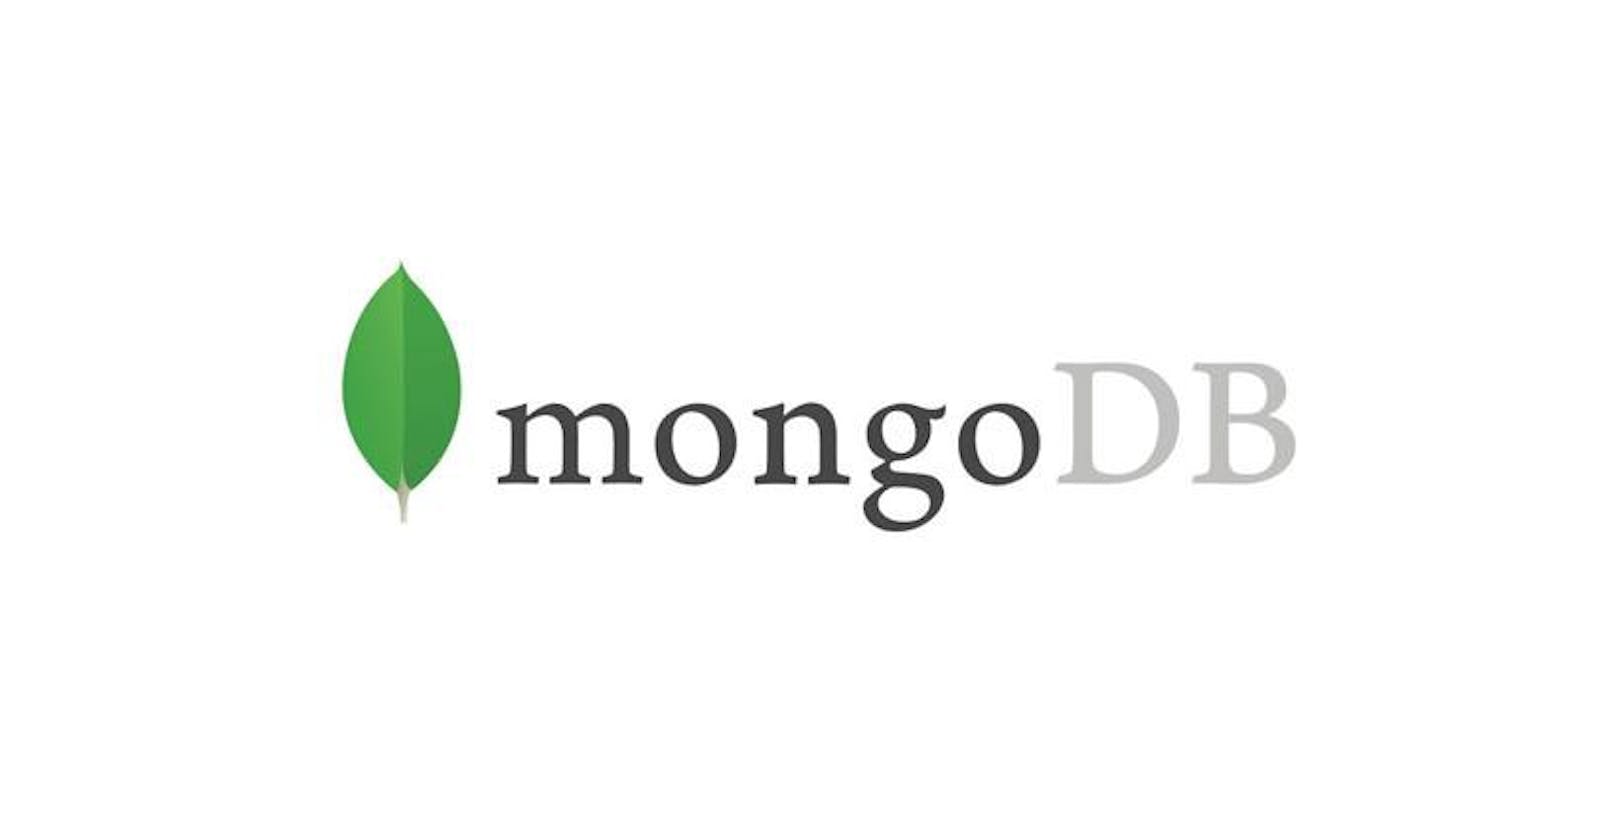 Setting up MongoDB on macOS Catalina — Common Errors and their Solutions